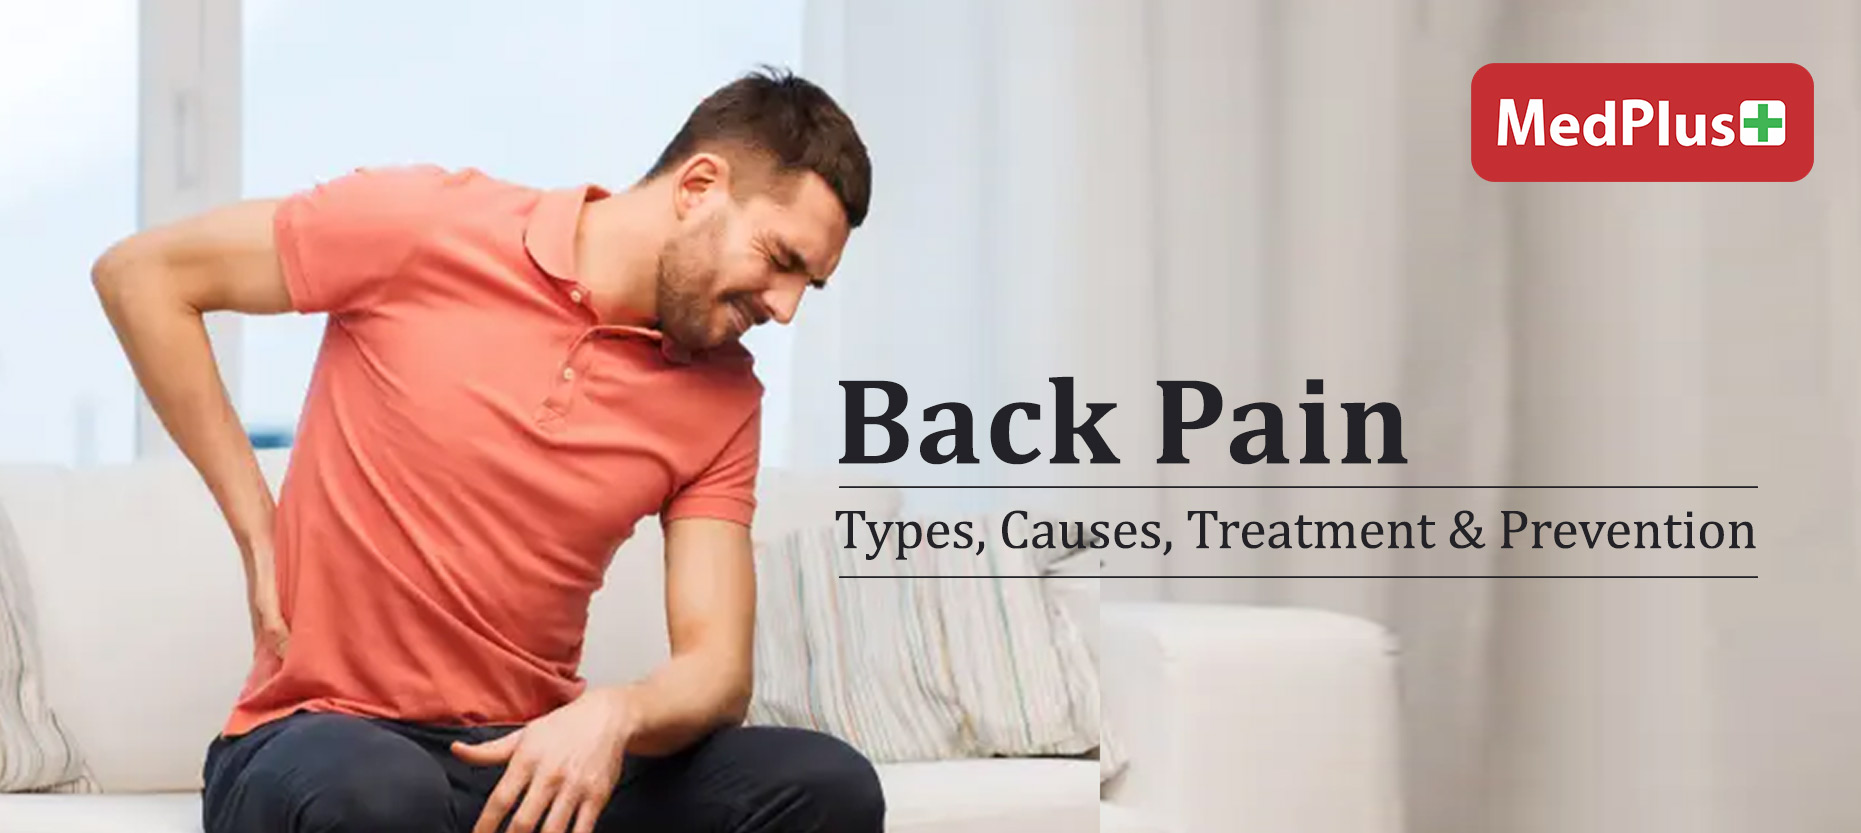 Back Pain: Types, Causes, Treatment & Prevention